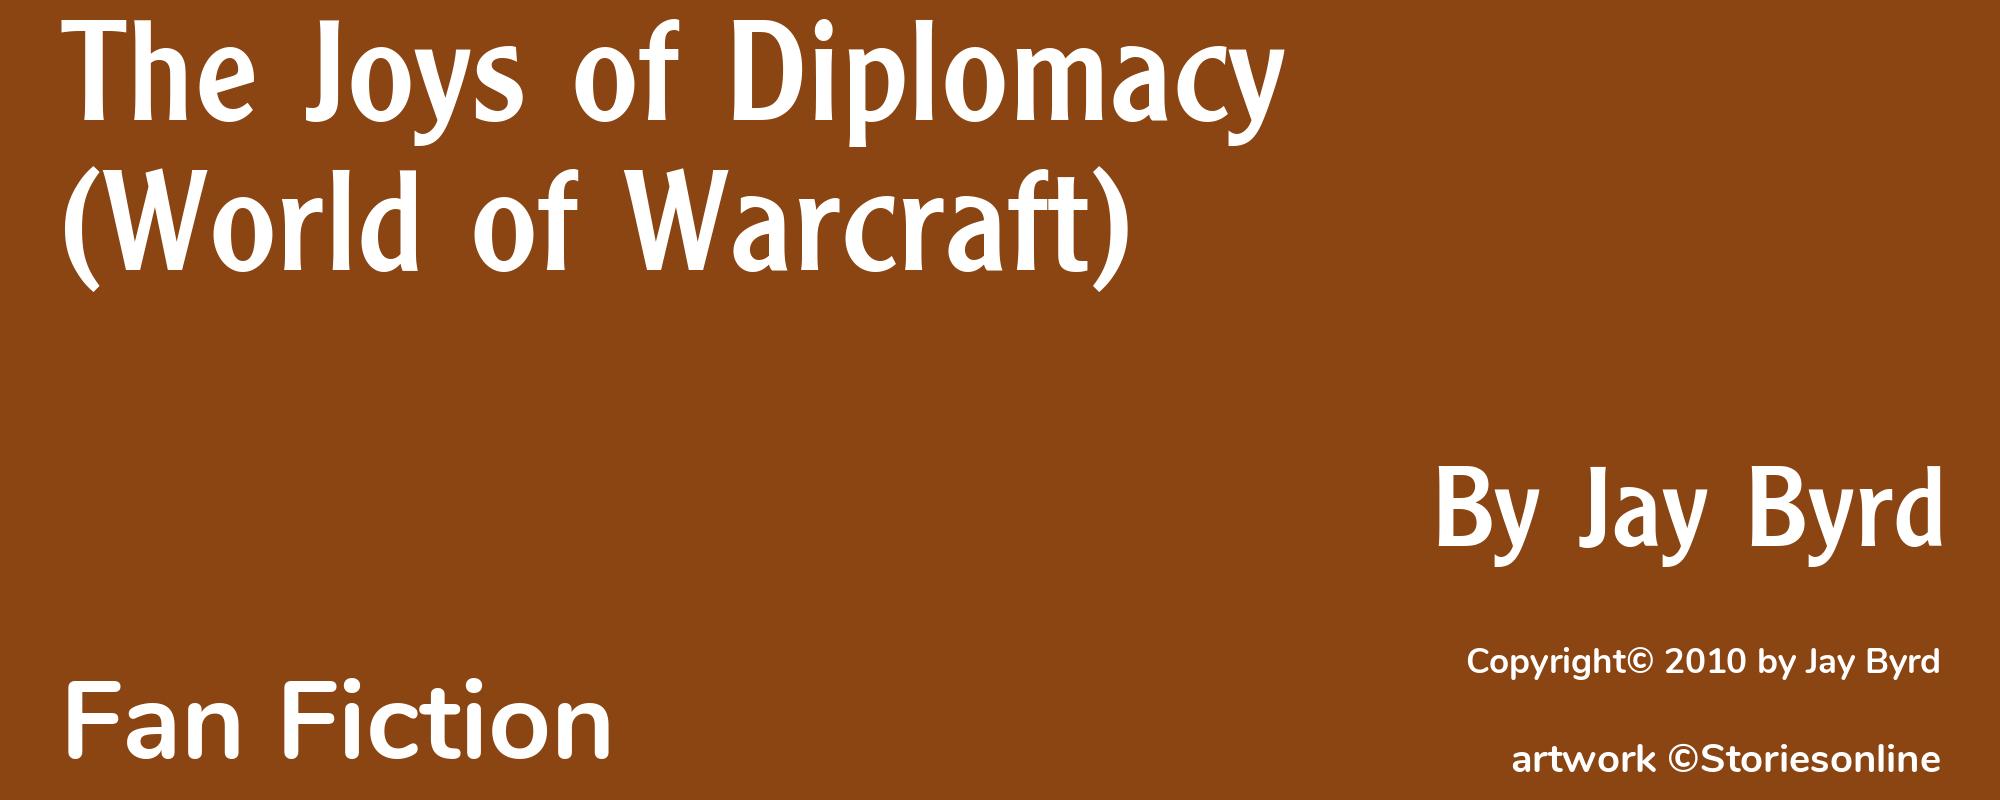 The Joys of Diplomacy (World of Warcraft) - Cover